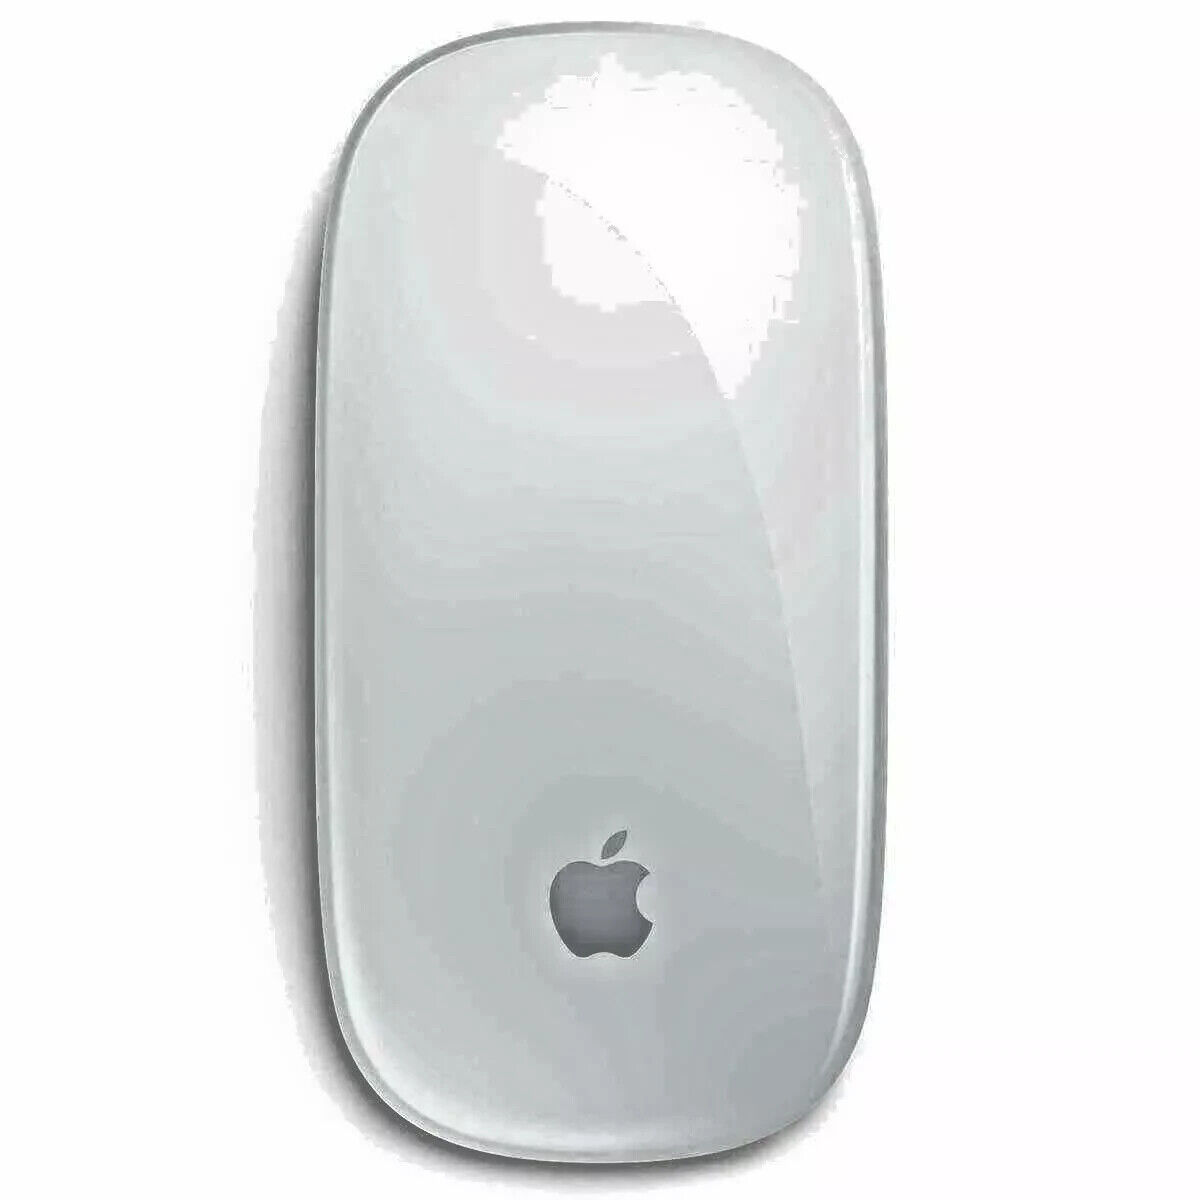 Apple Magic Mouse Bluetooth Wireless Multi Touch Mouse A1296 1st Generation